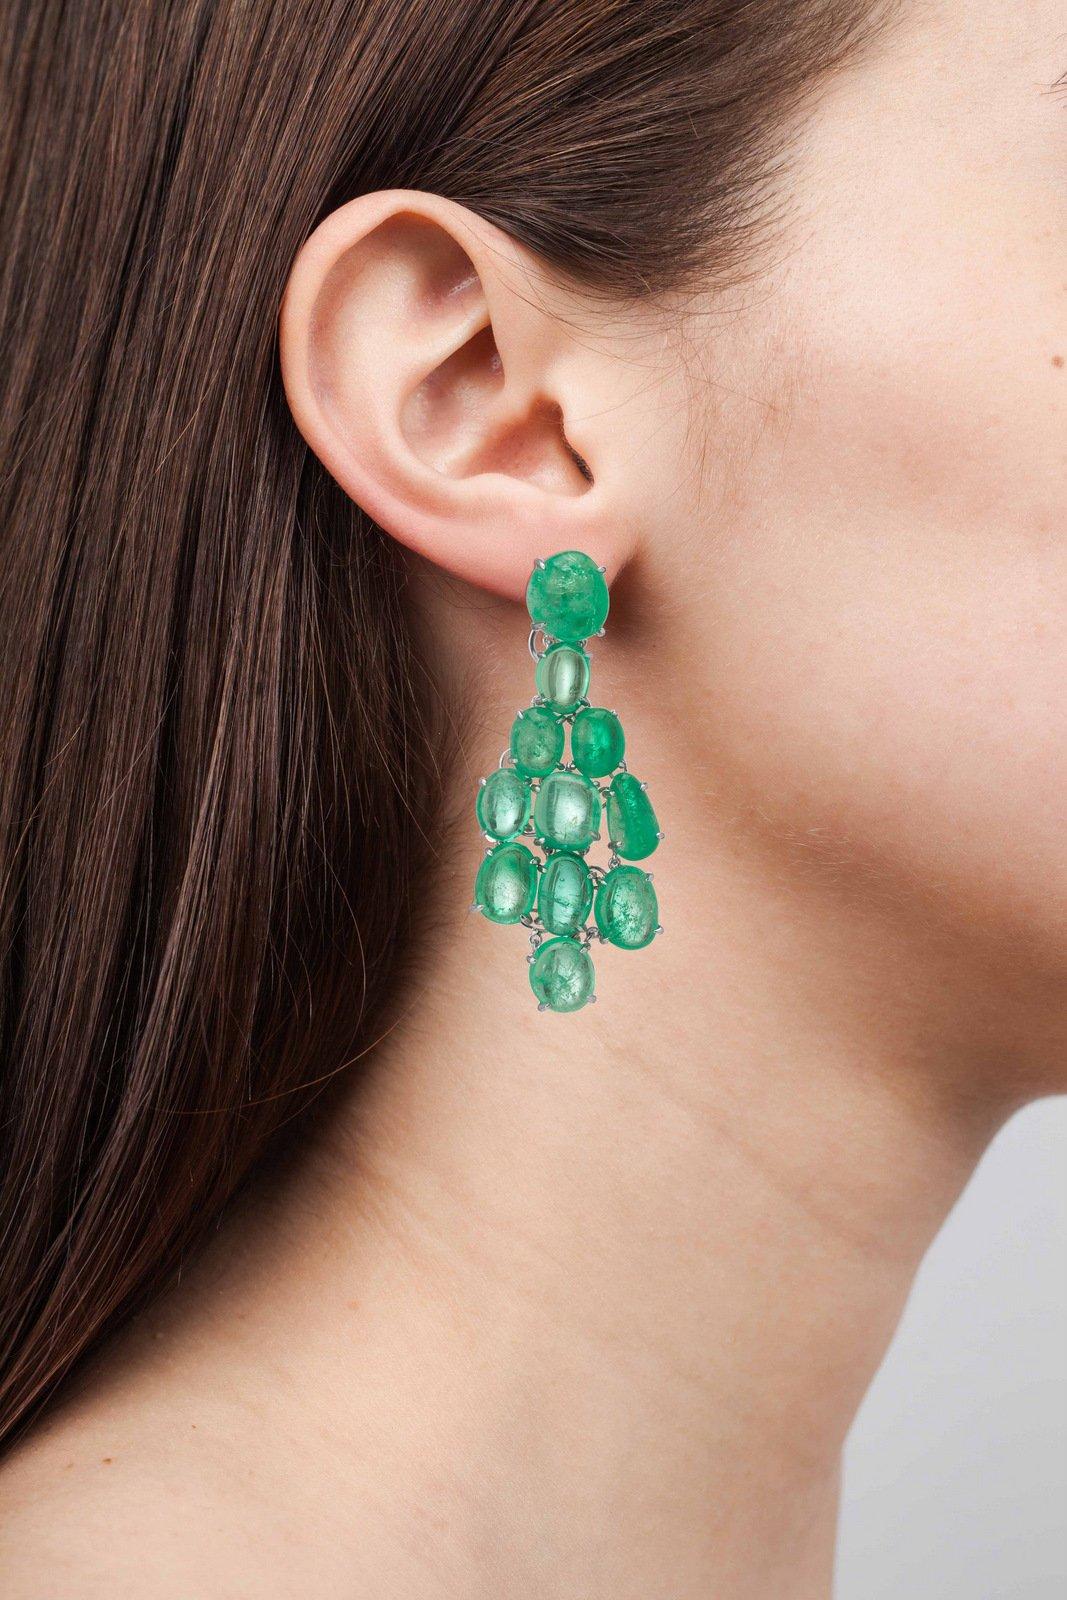 18 Karat white gold Chandelier earrings set with Muzo Colombian emeralds weighing 47.77 carats.

Muzo Emerald Colombia Heritage Muisca Earrings set with 47.77 carats Emerald.

Named in honor of the ancient indigenous people of the Muzo region of